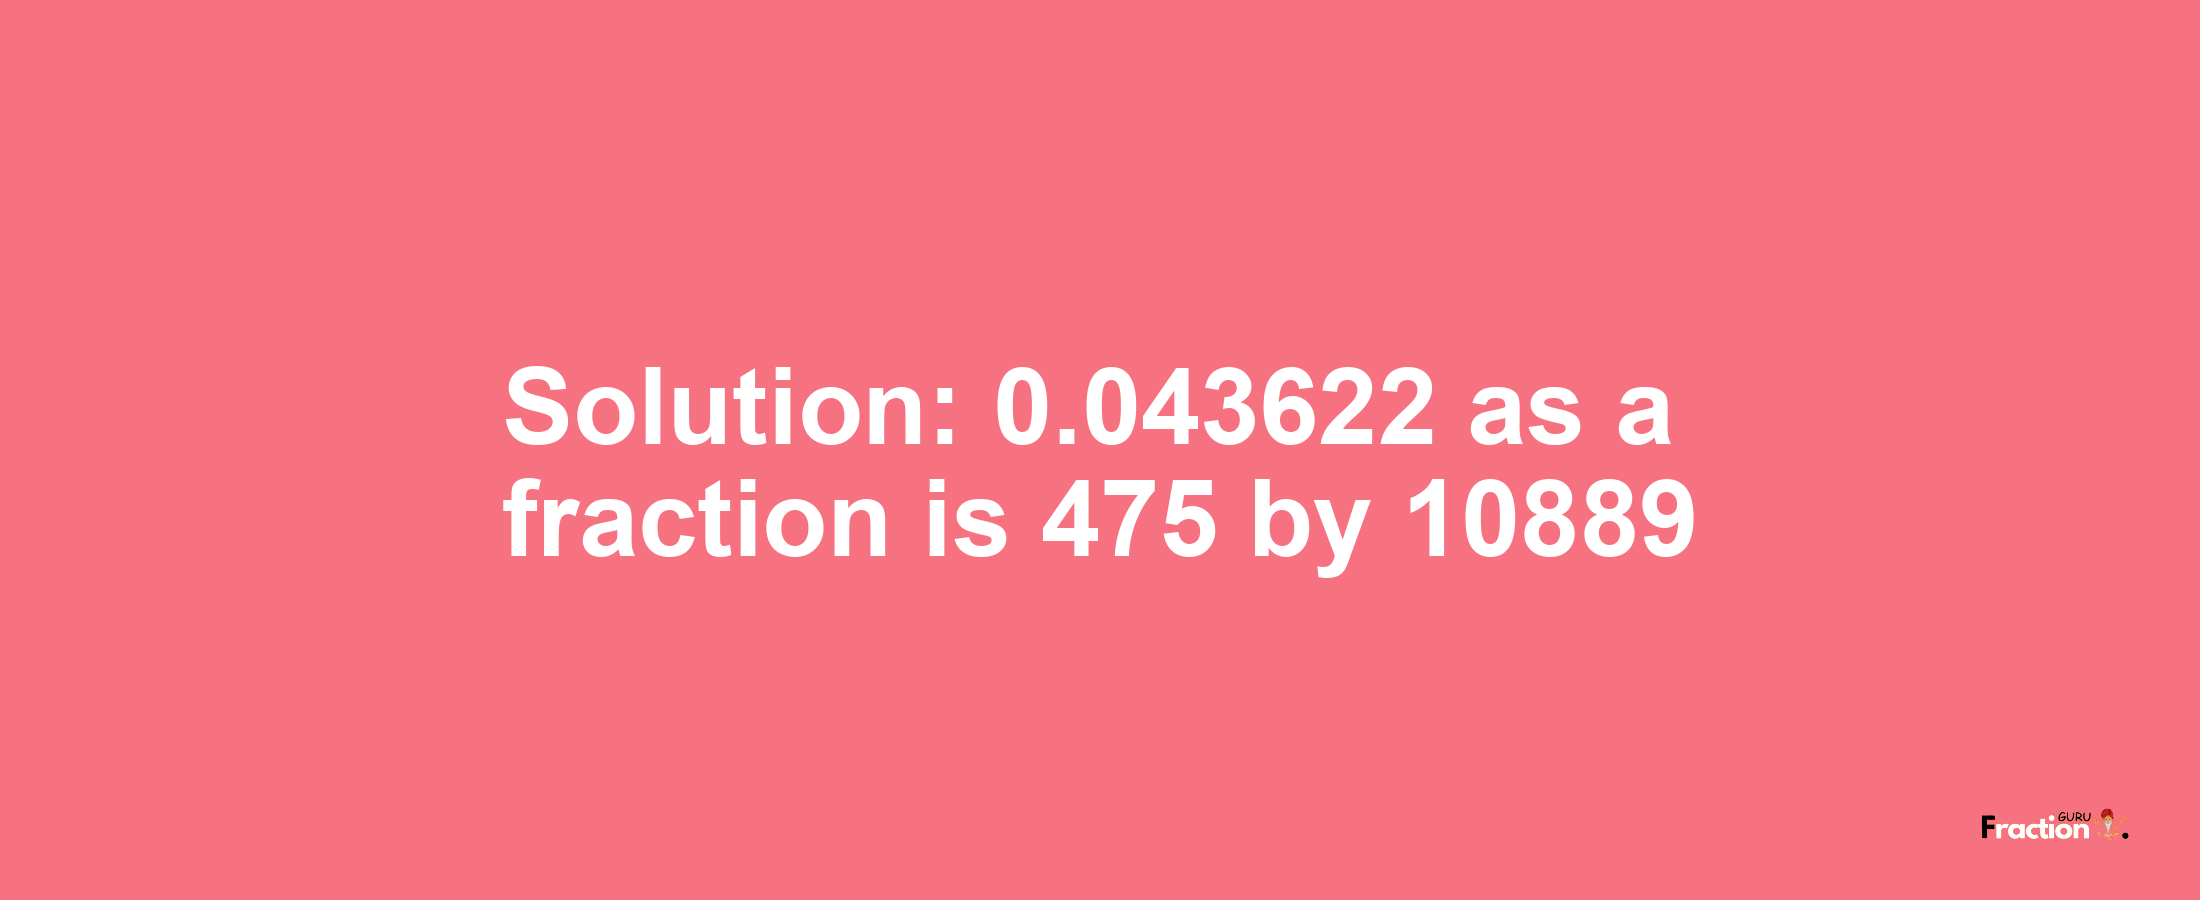 Solution:0.043622 as a fraction is 475/10889